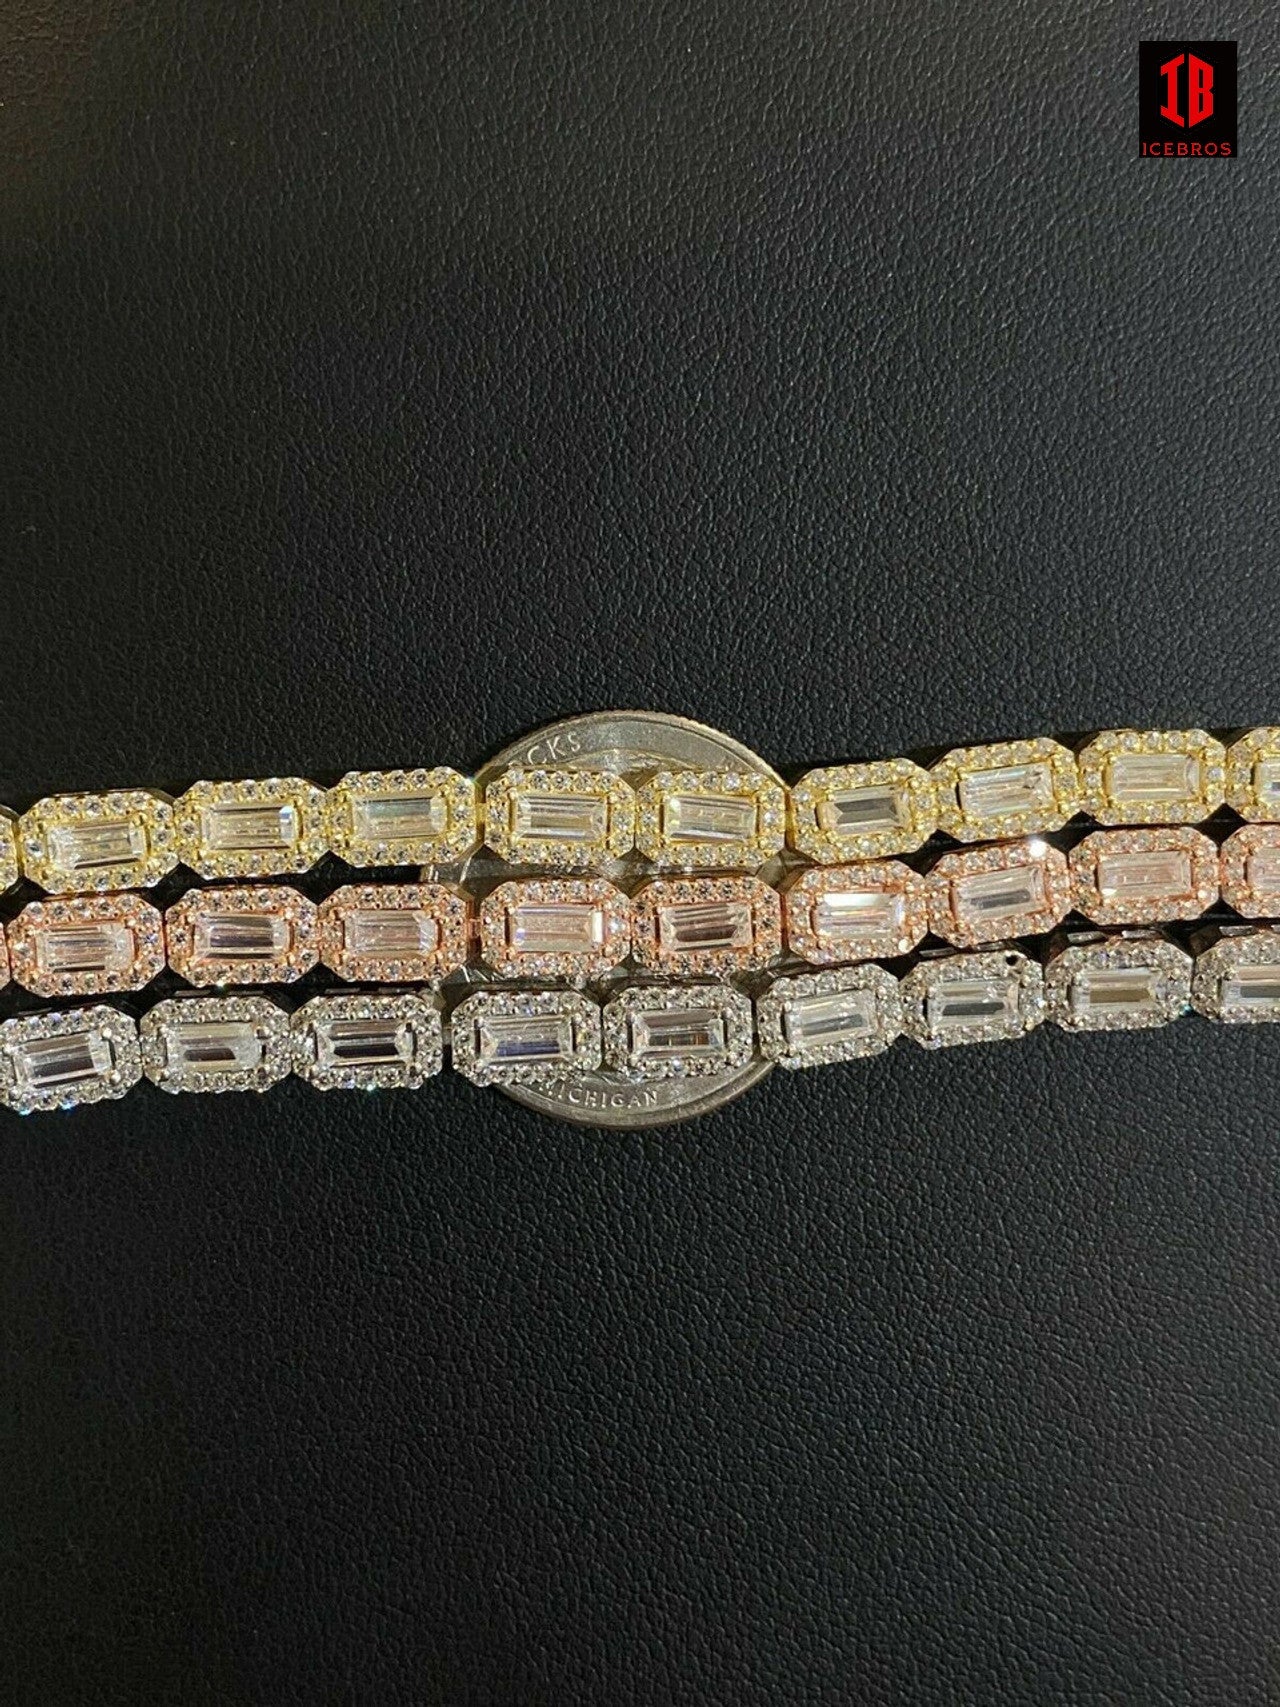 Real 925 Silver / Yellow Rose Gold Baguette CZ Crystal Tennis Halo Bracelet 6mm